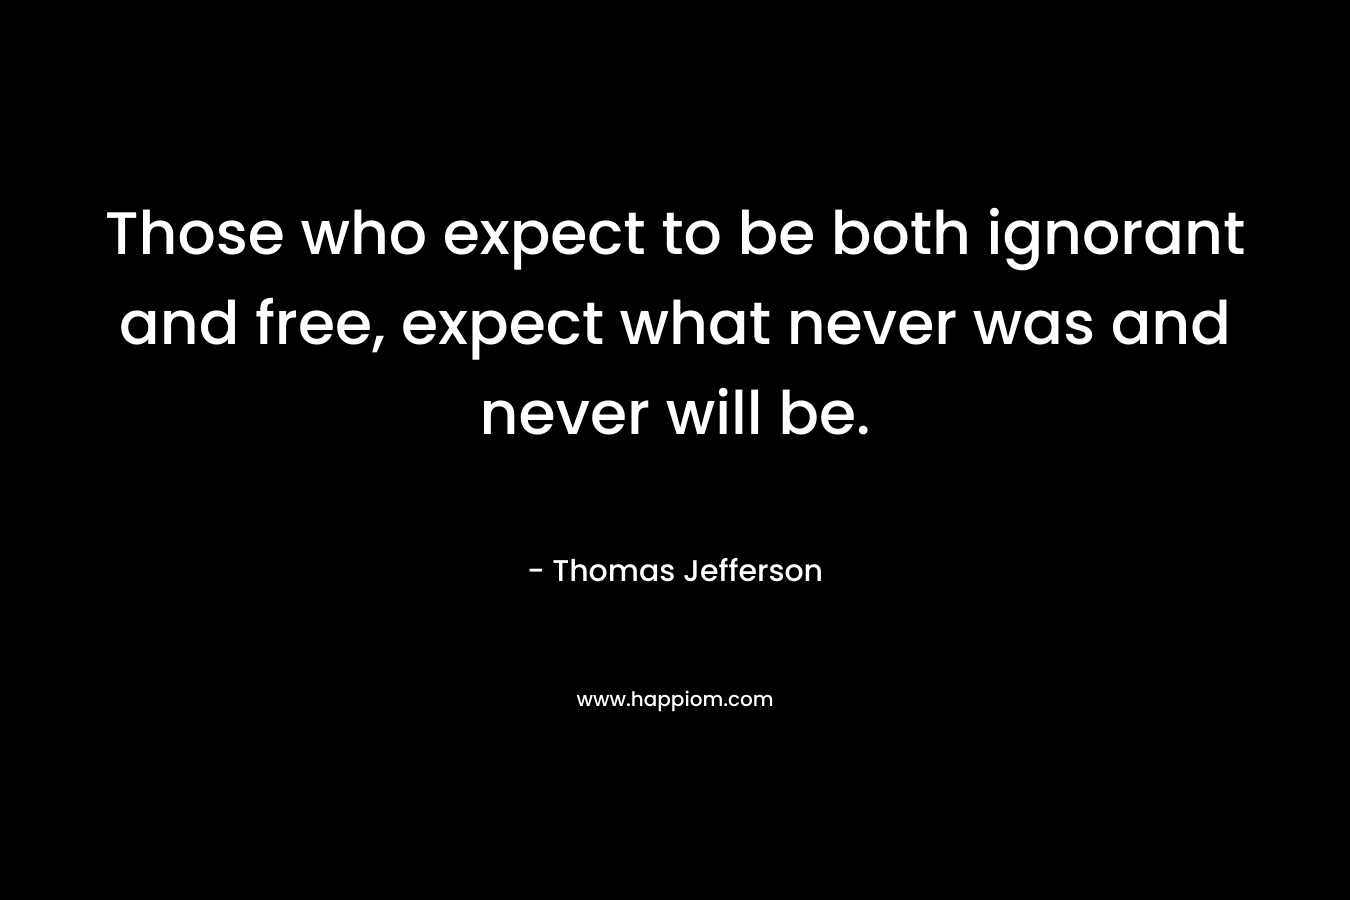 Those who expect to be both ignorant and free, expect what never was and never will be.